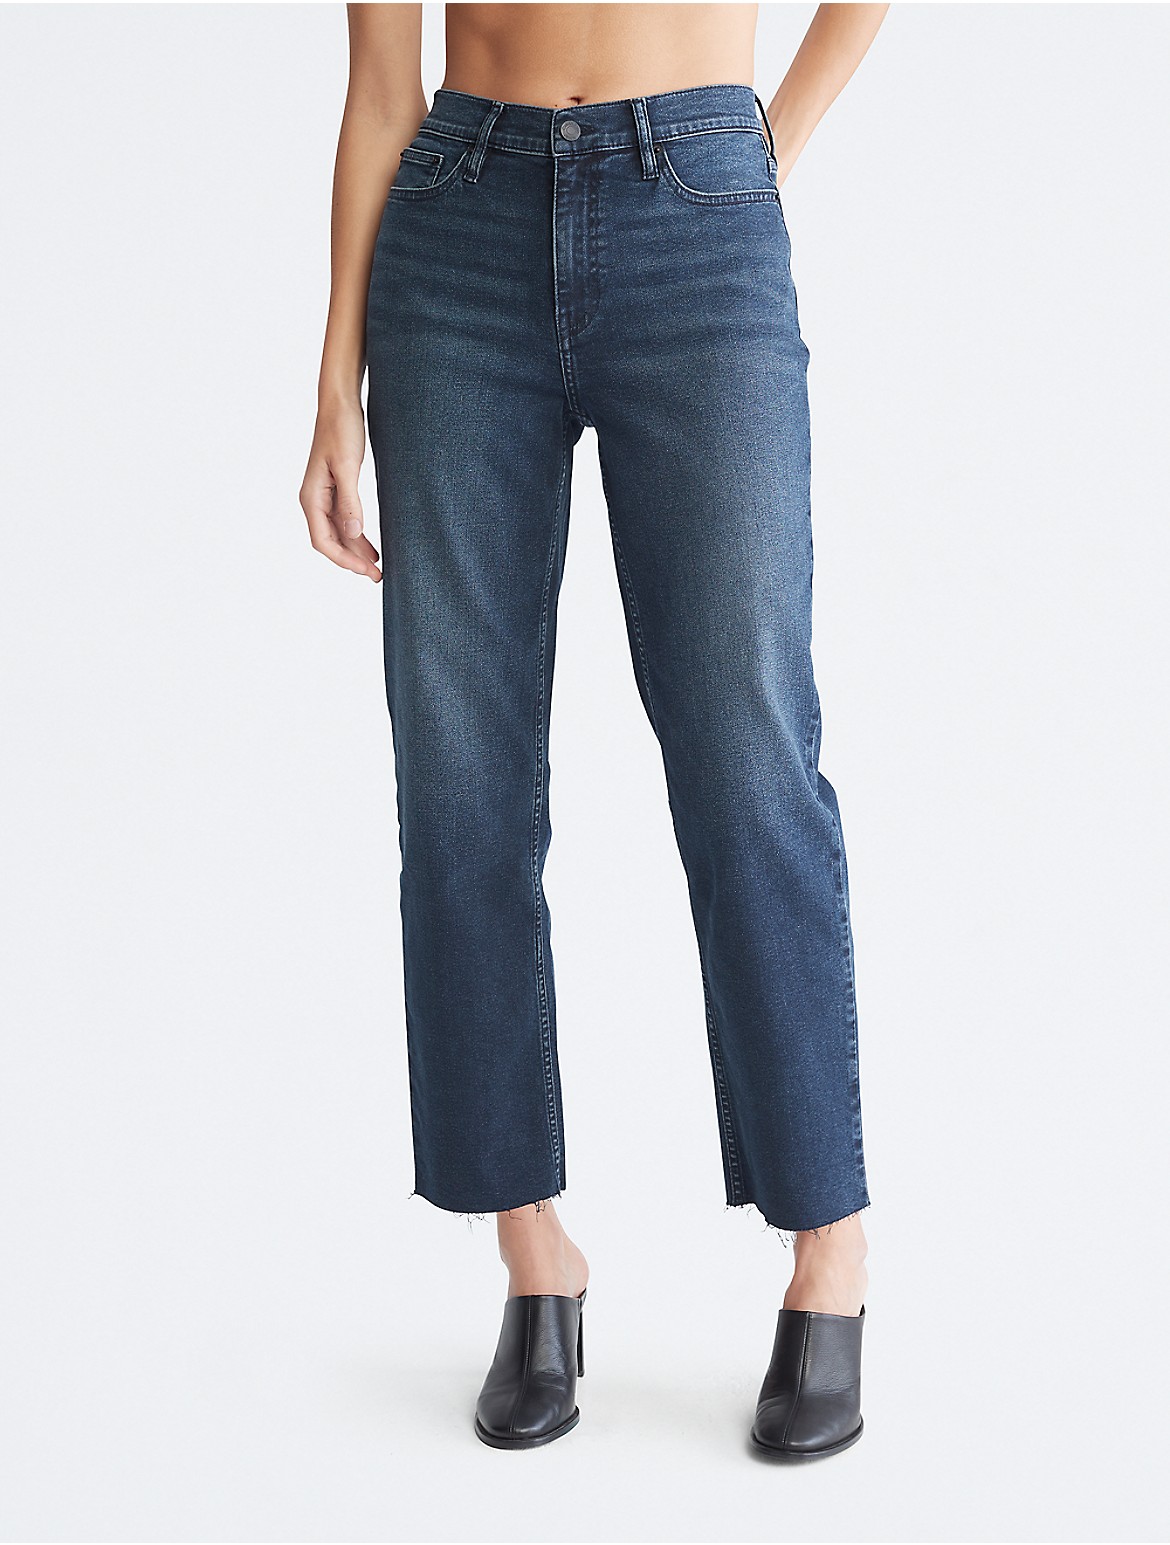 Calvin Klein Women's Straight Fit High Rise Ankle Jeans - Blue - 31